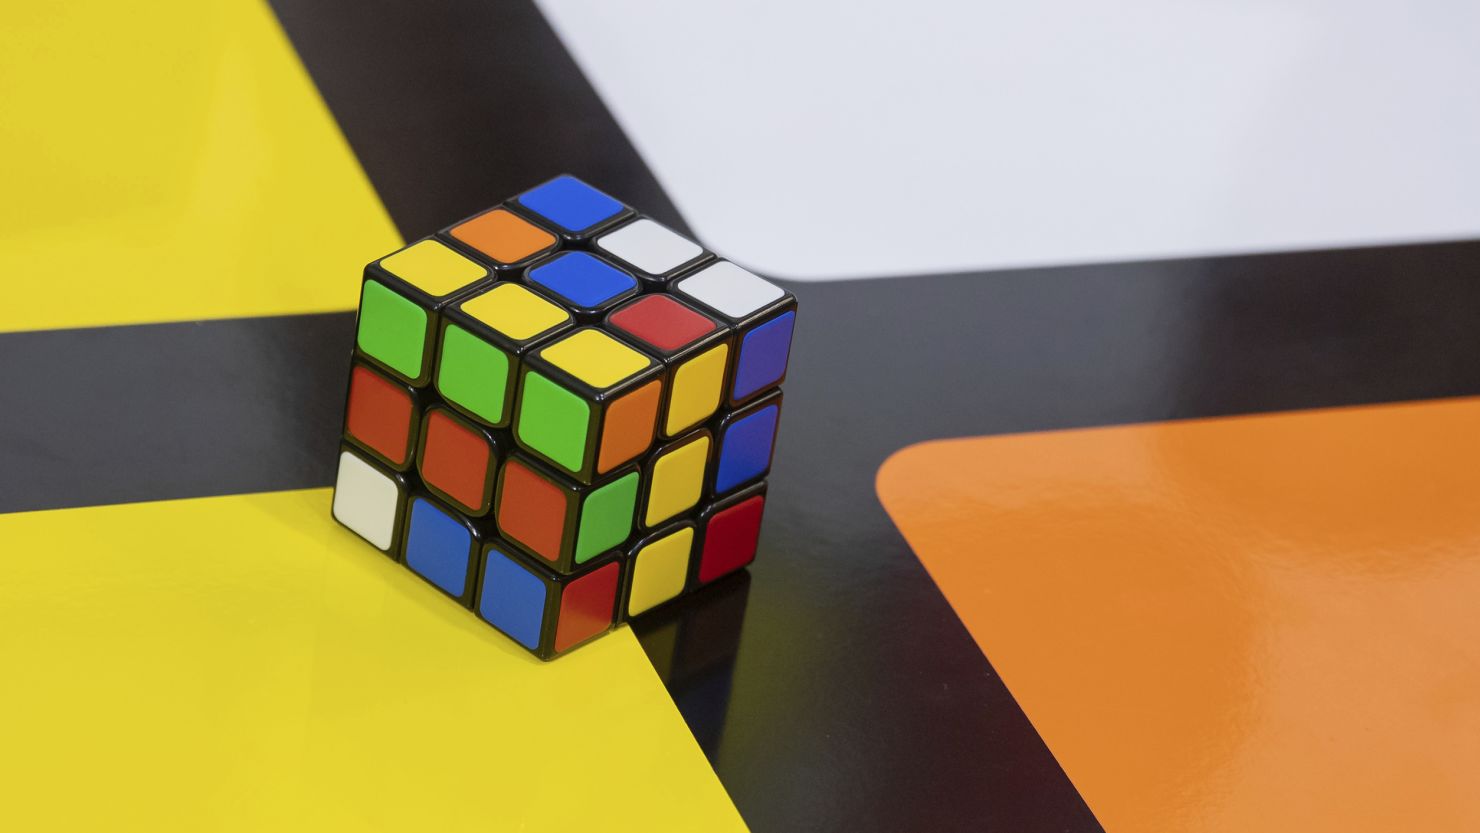 How quickly can you solve a Rubik's Cube? A 21-year-old set a new